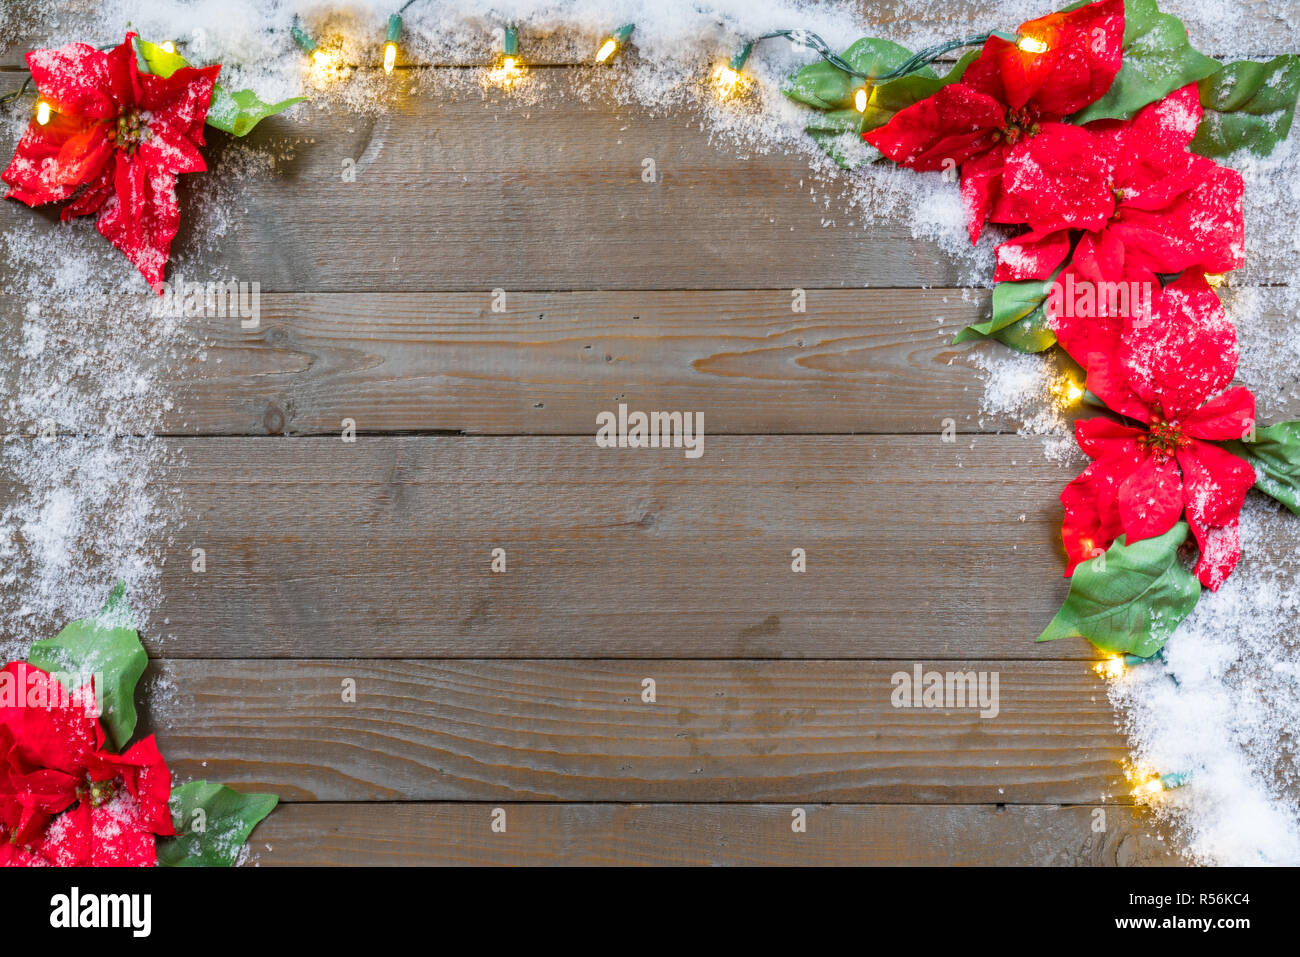 Snow Covered Christmas poinsettia flowers on wooden planks background with lights Stock Photo